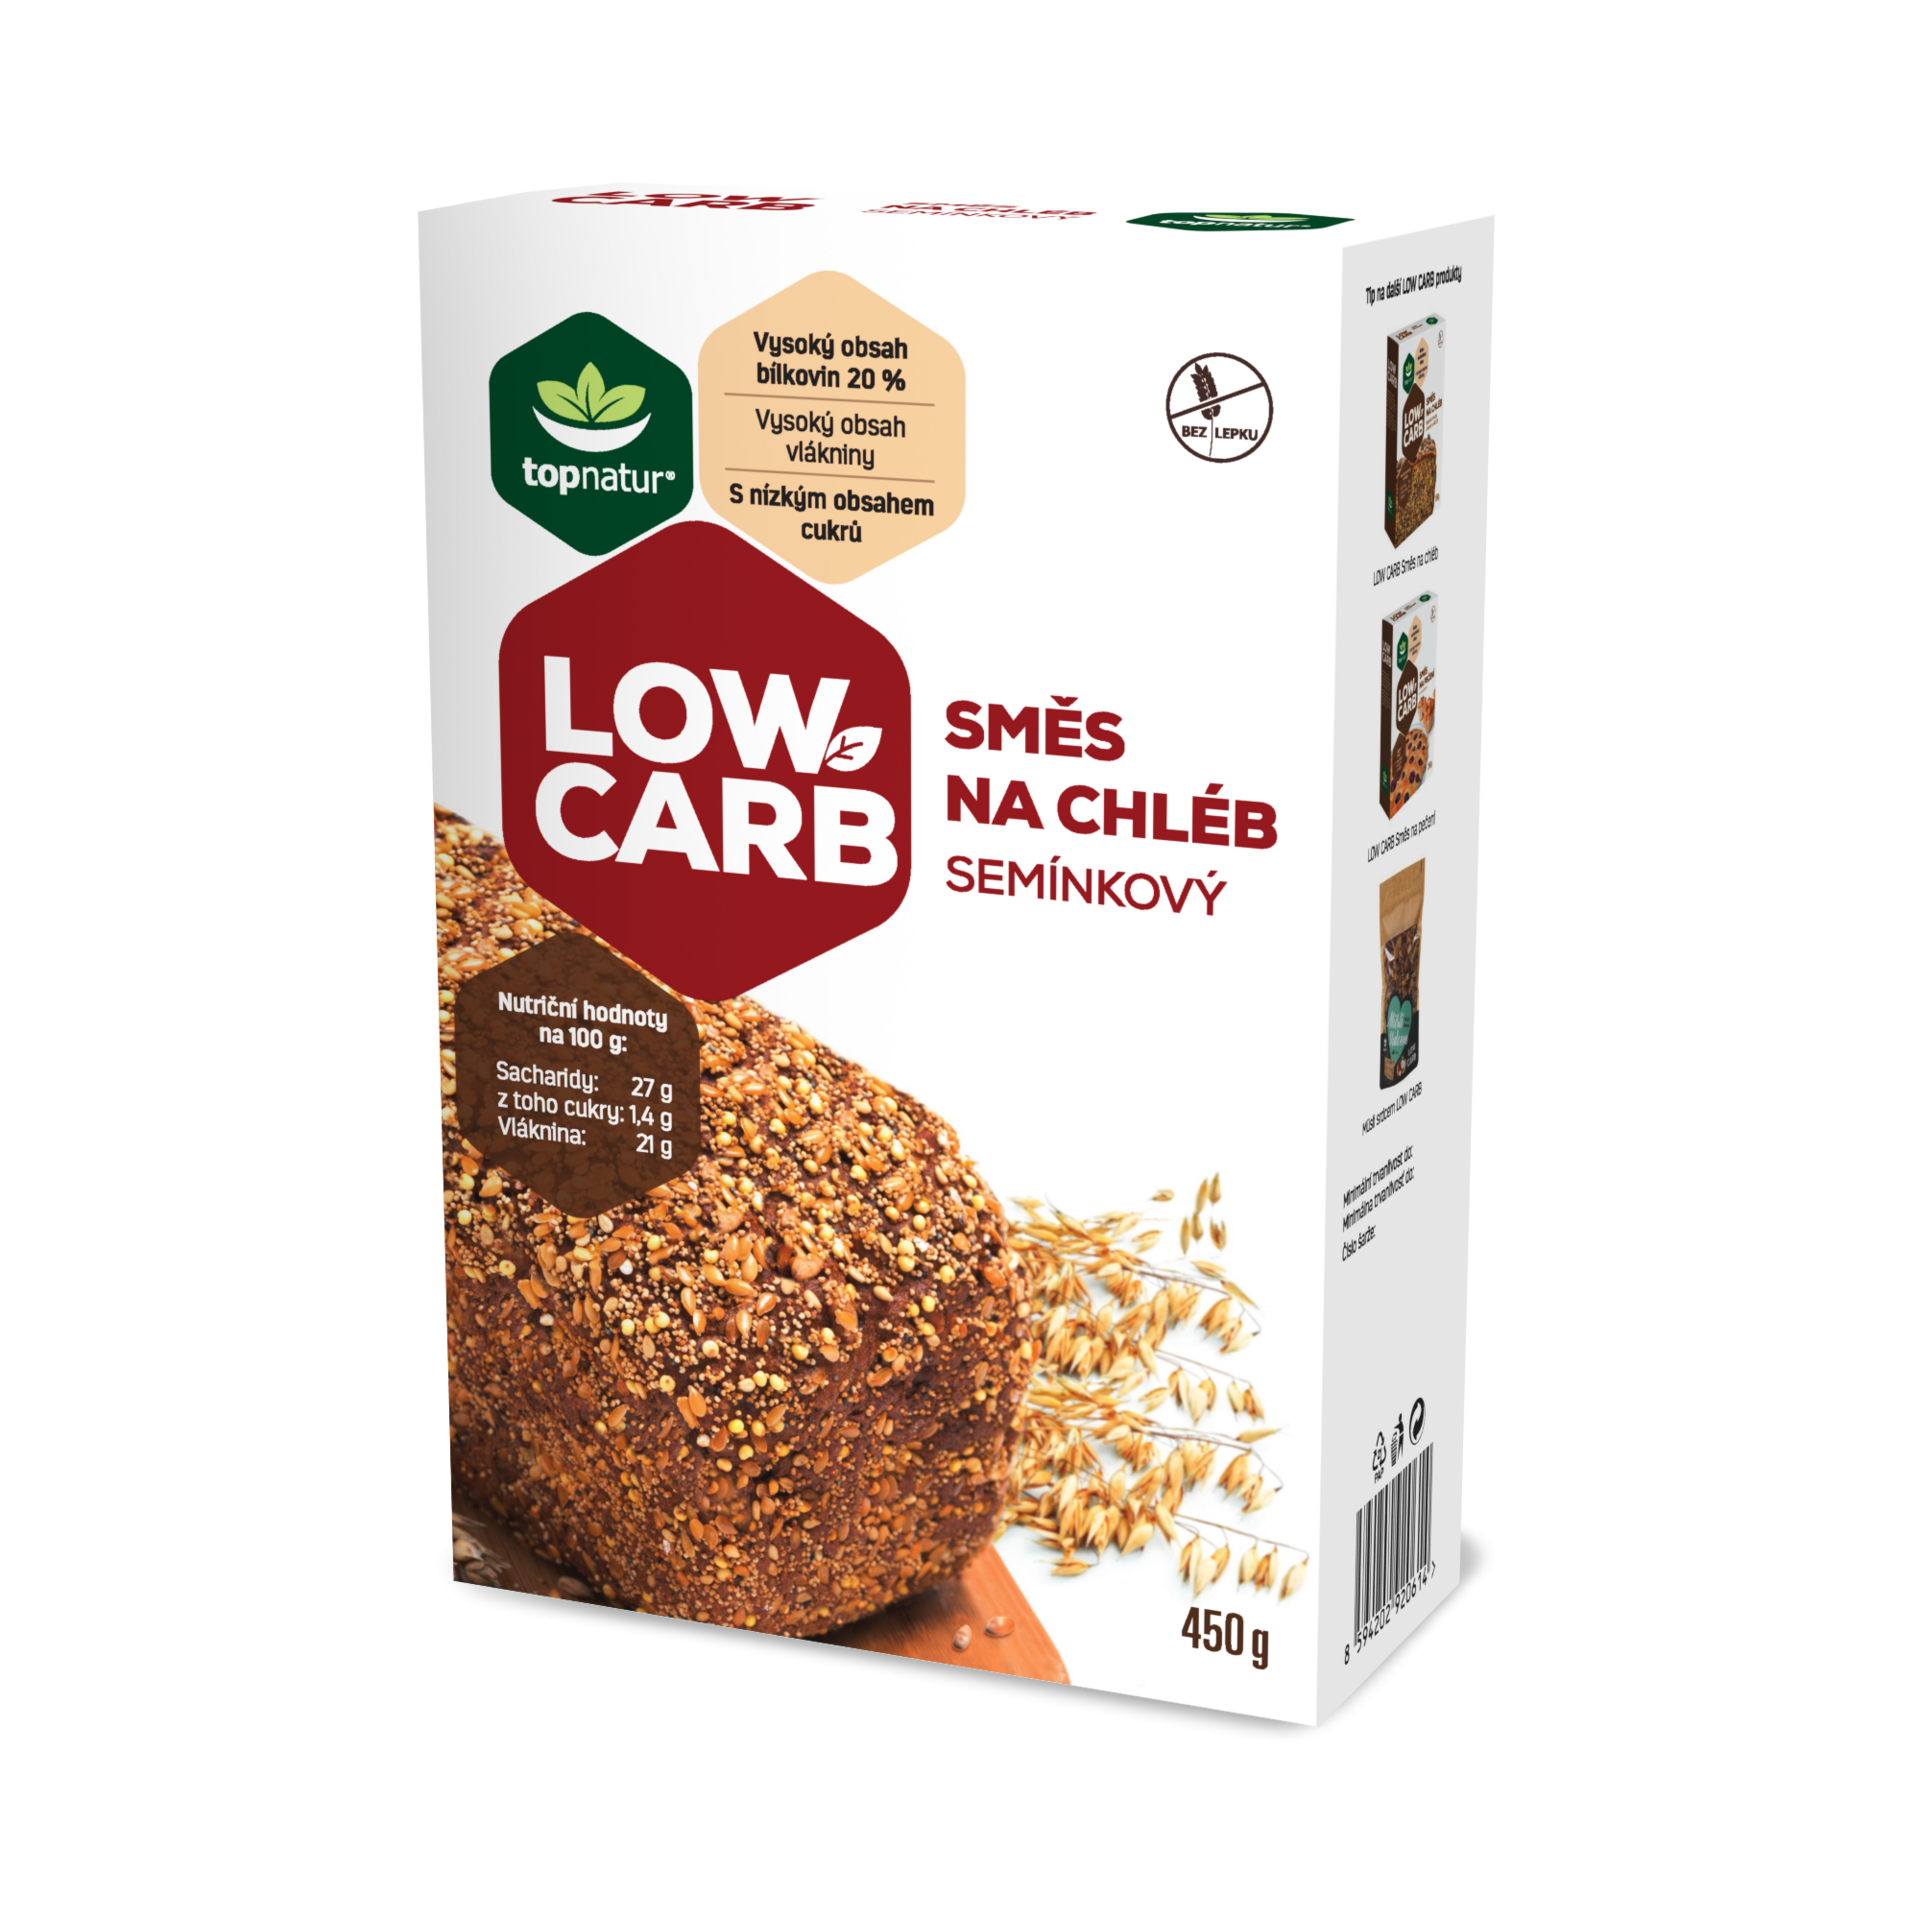 low-carb-smes-na-chleb-seminkovy-450-g.6357a476dc664